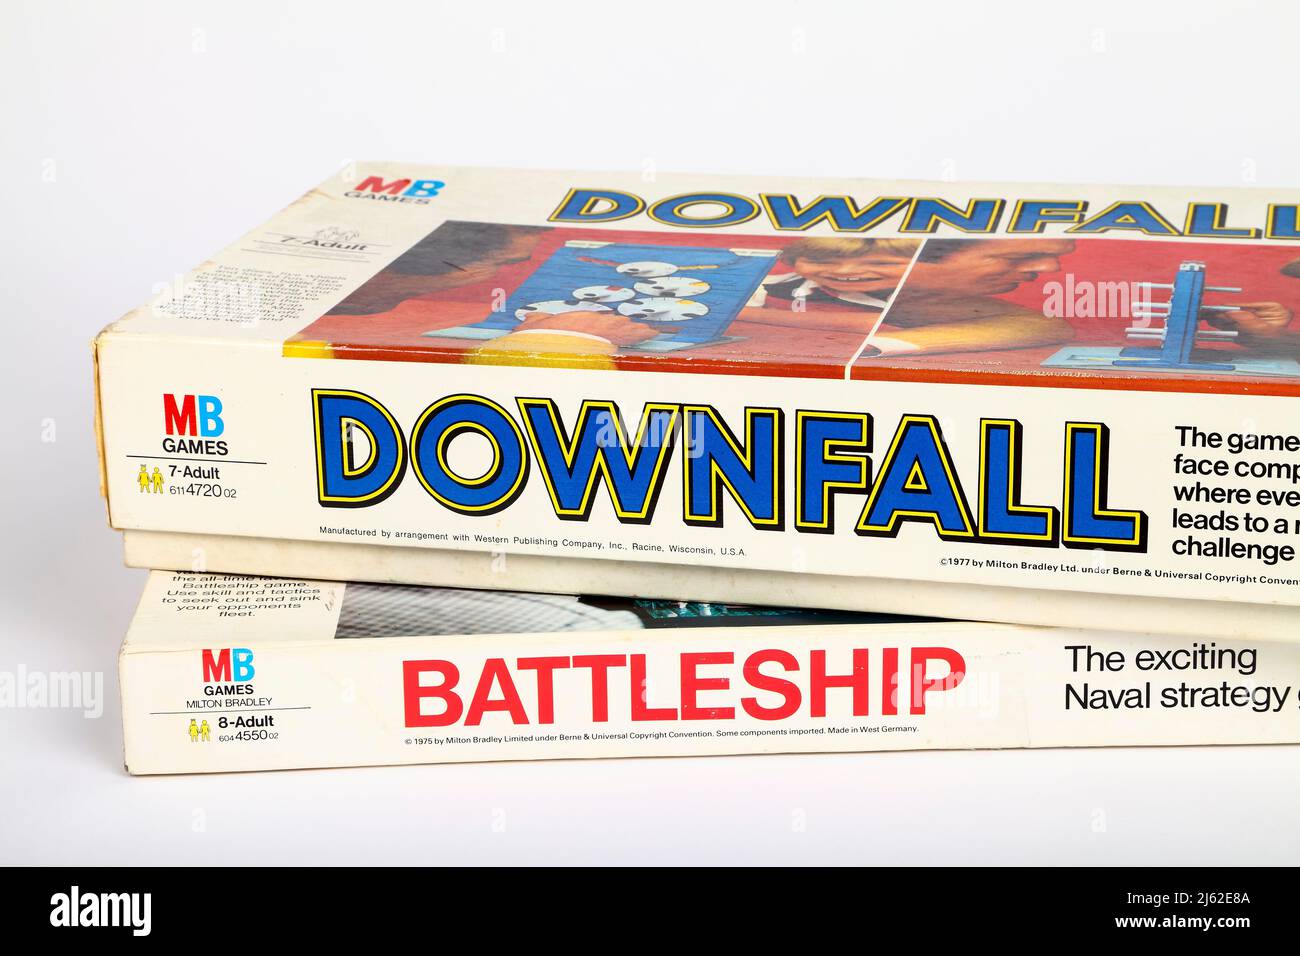 Mb Games Battleship tactical naval war strategy game for two players and Downfall game Stock Photo